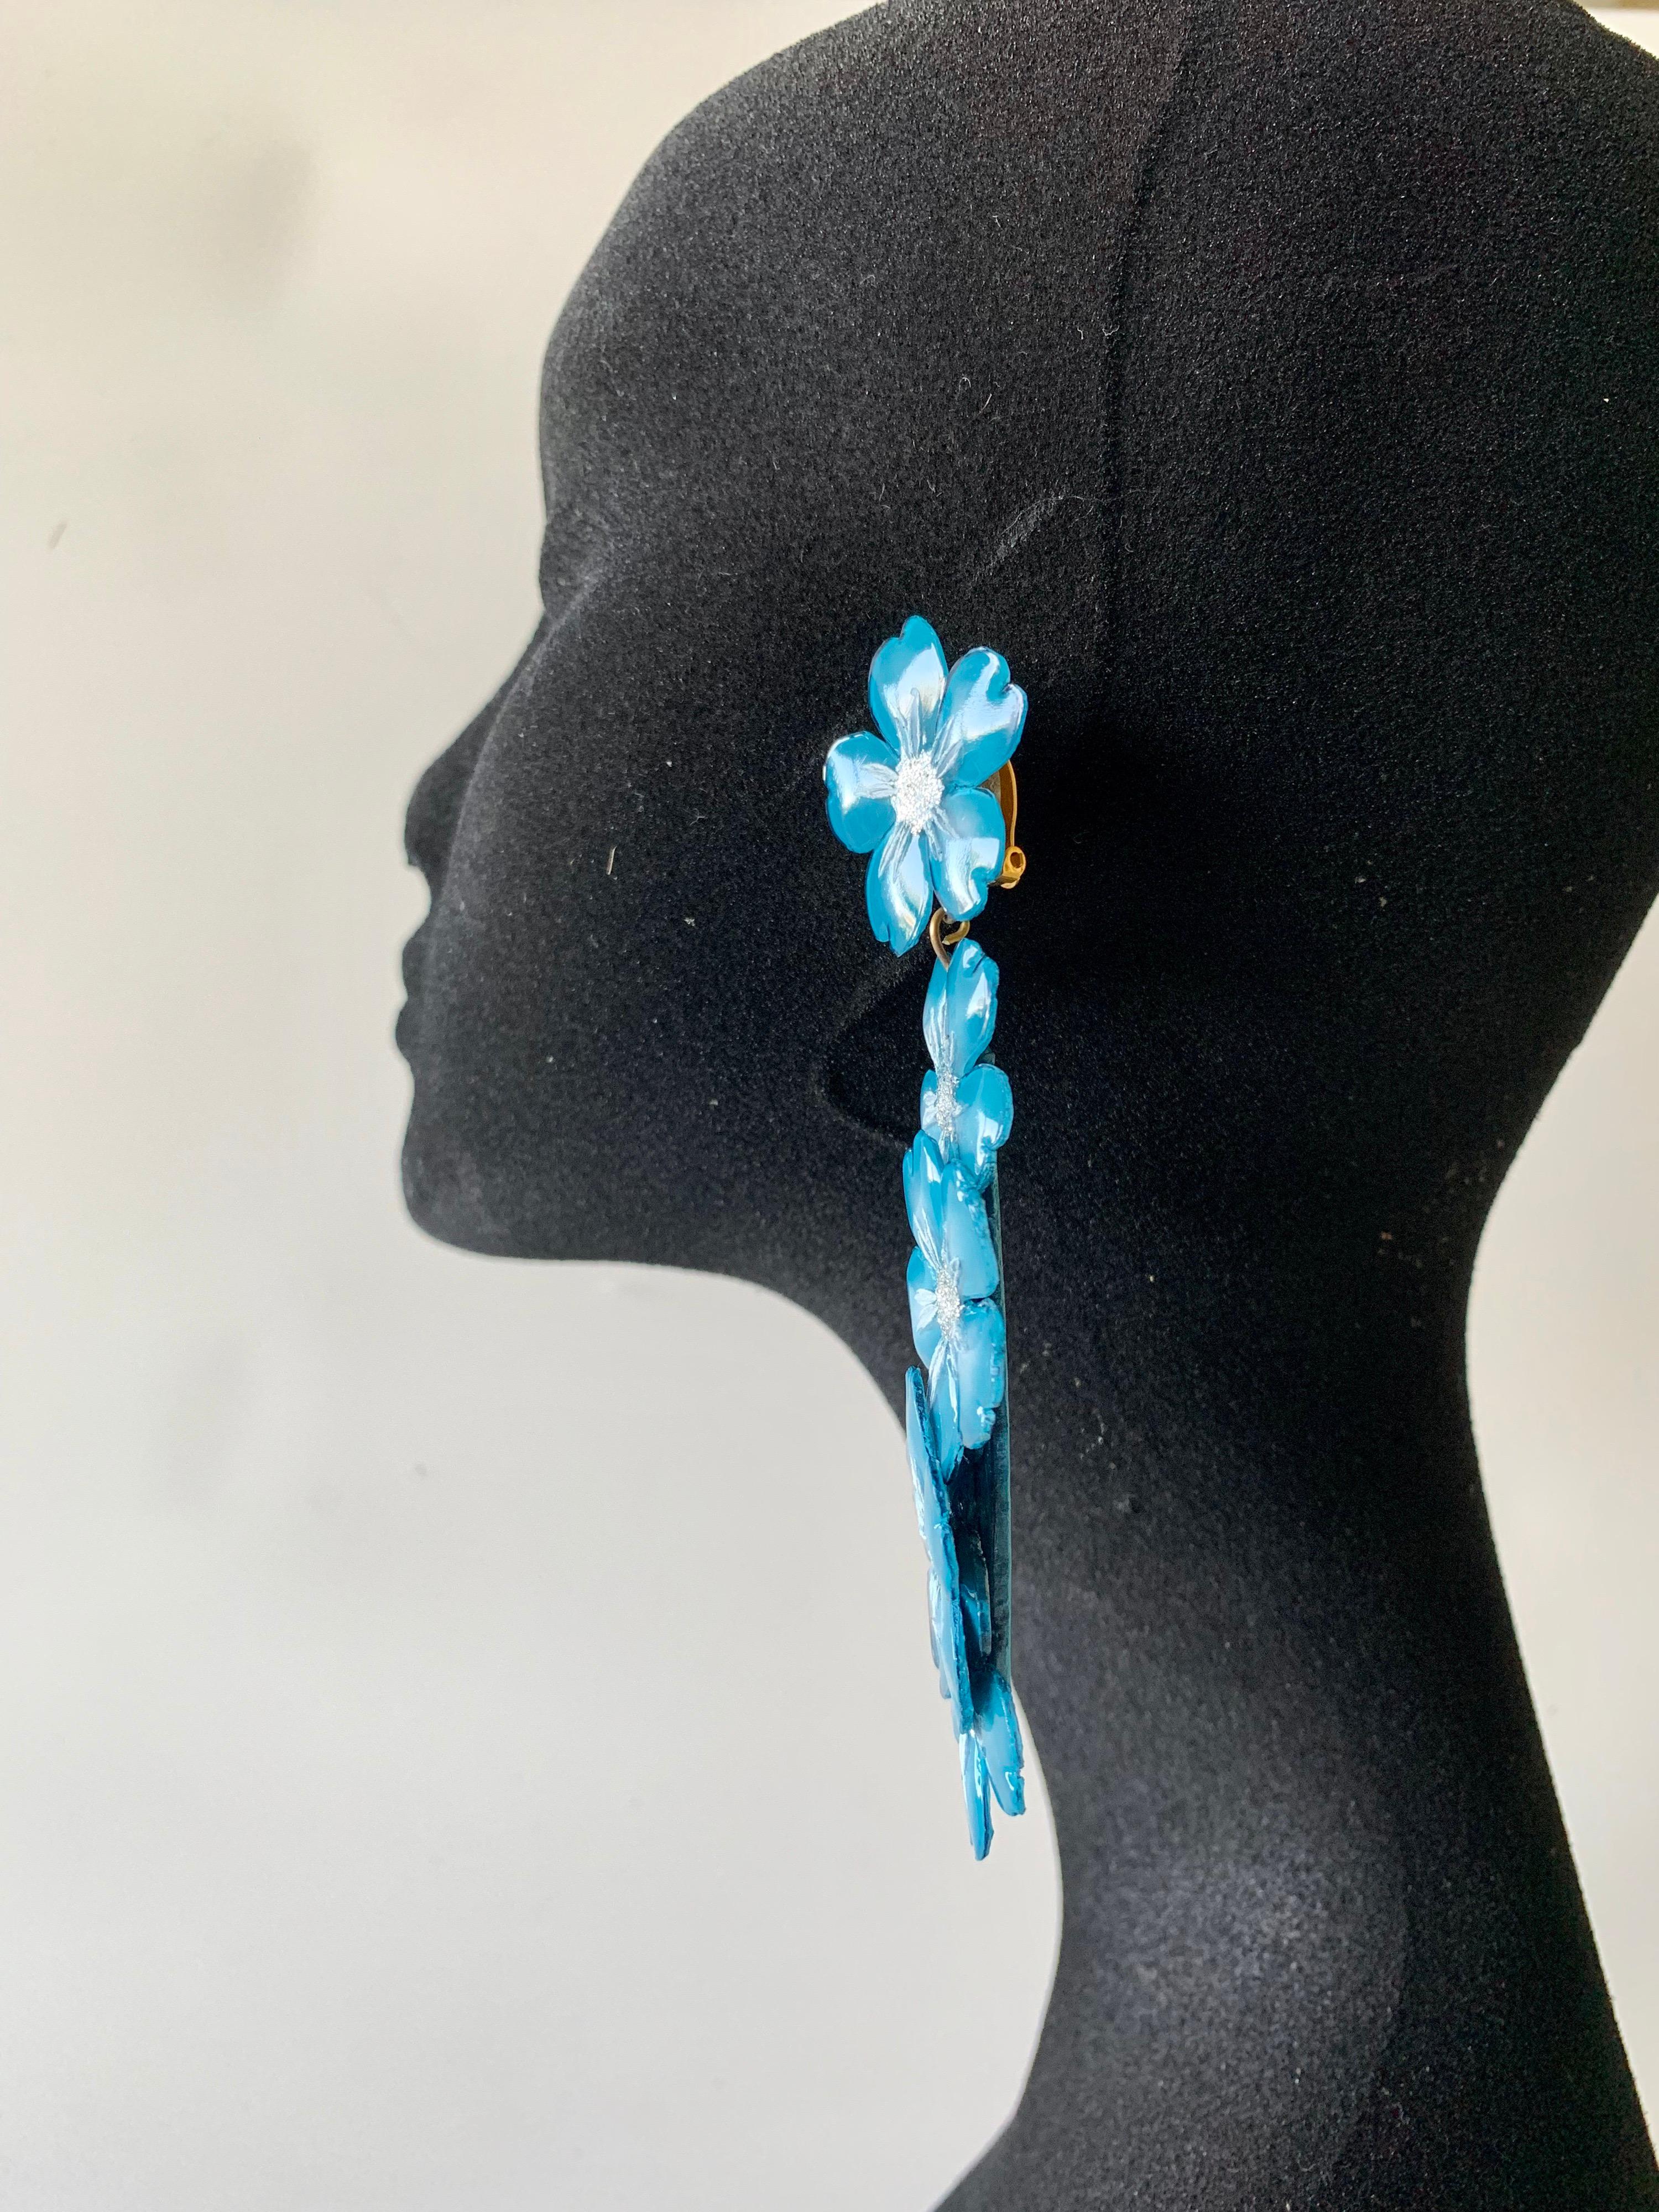 Contemporary  Blue and Silver Flower Chandelier Statement Earrings  3